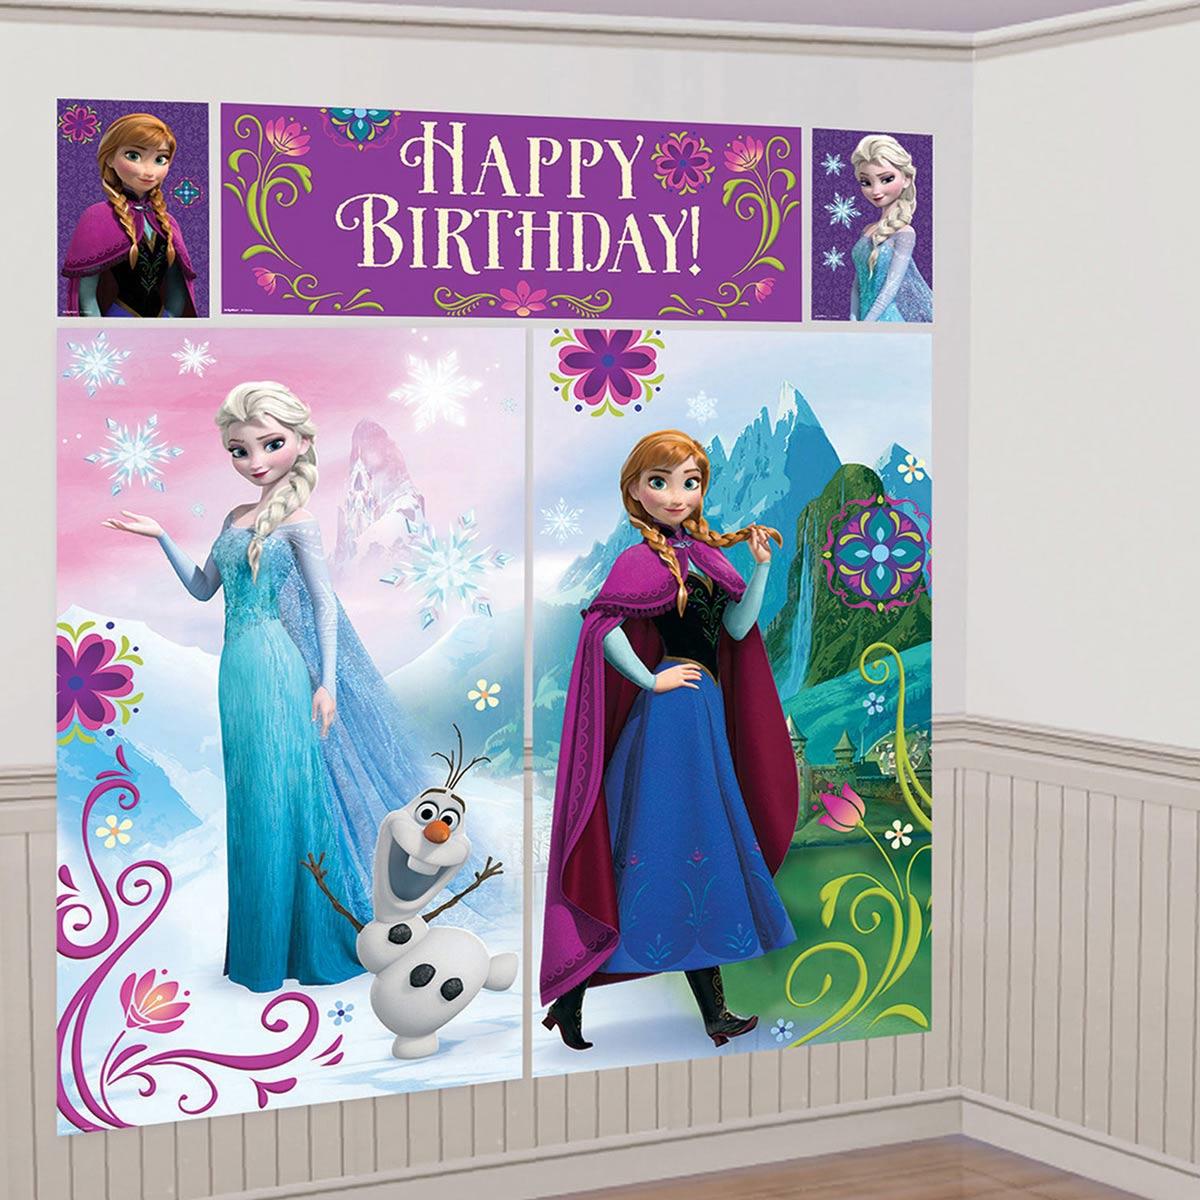 Disney's Frozen 5pc Scene Setter Pack by Amscan 999262 available here at Karnival Costumes online party shop